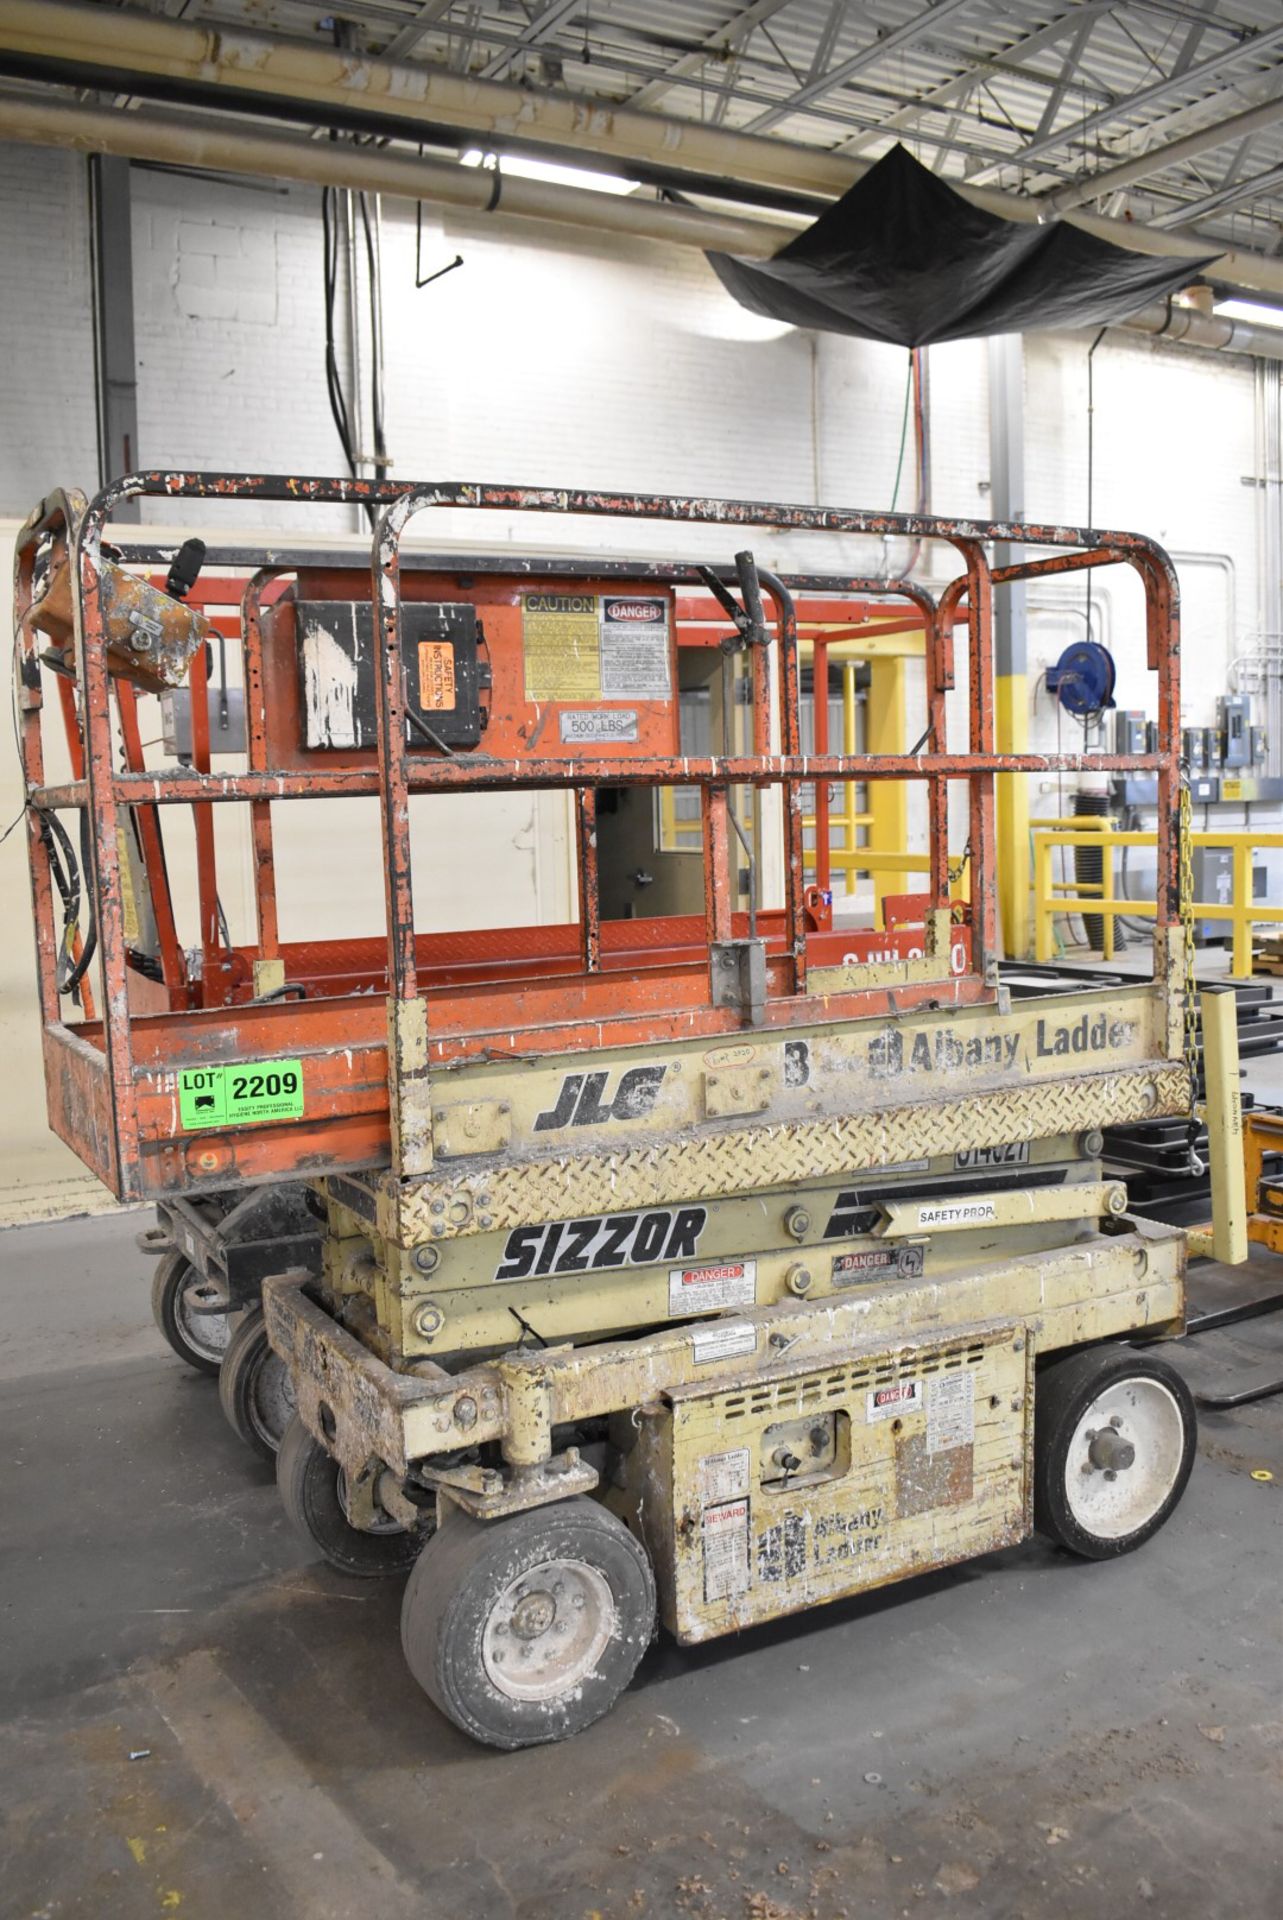 JLG CM-1432 ELECTRIC SCISSOR LIFT WITH 14' MAX VERTICAL REACH, 500 LBS. CAPACITY, 24 VOLT BATTERY - Image 2 of 8